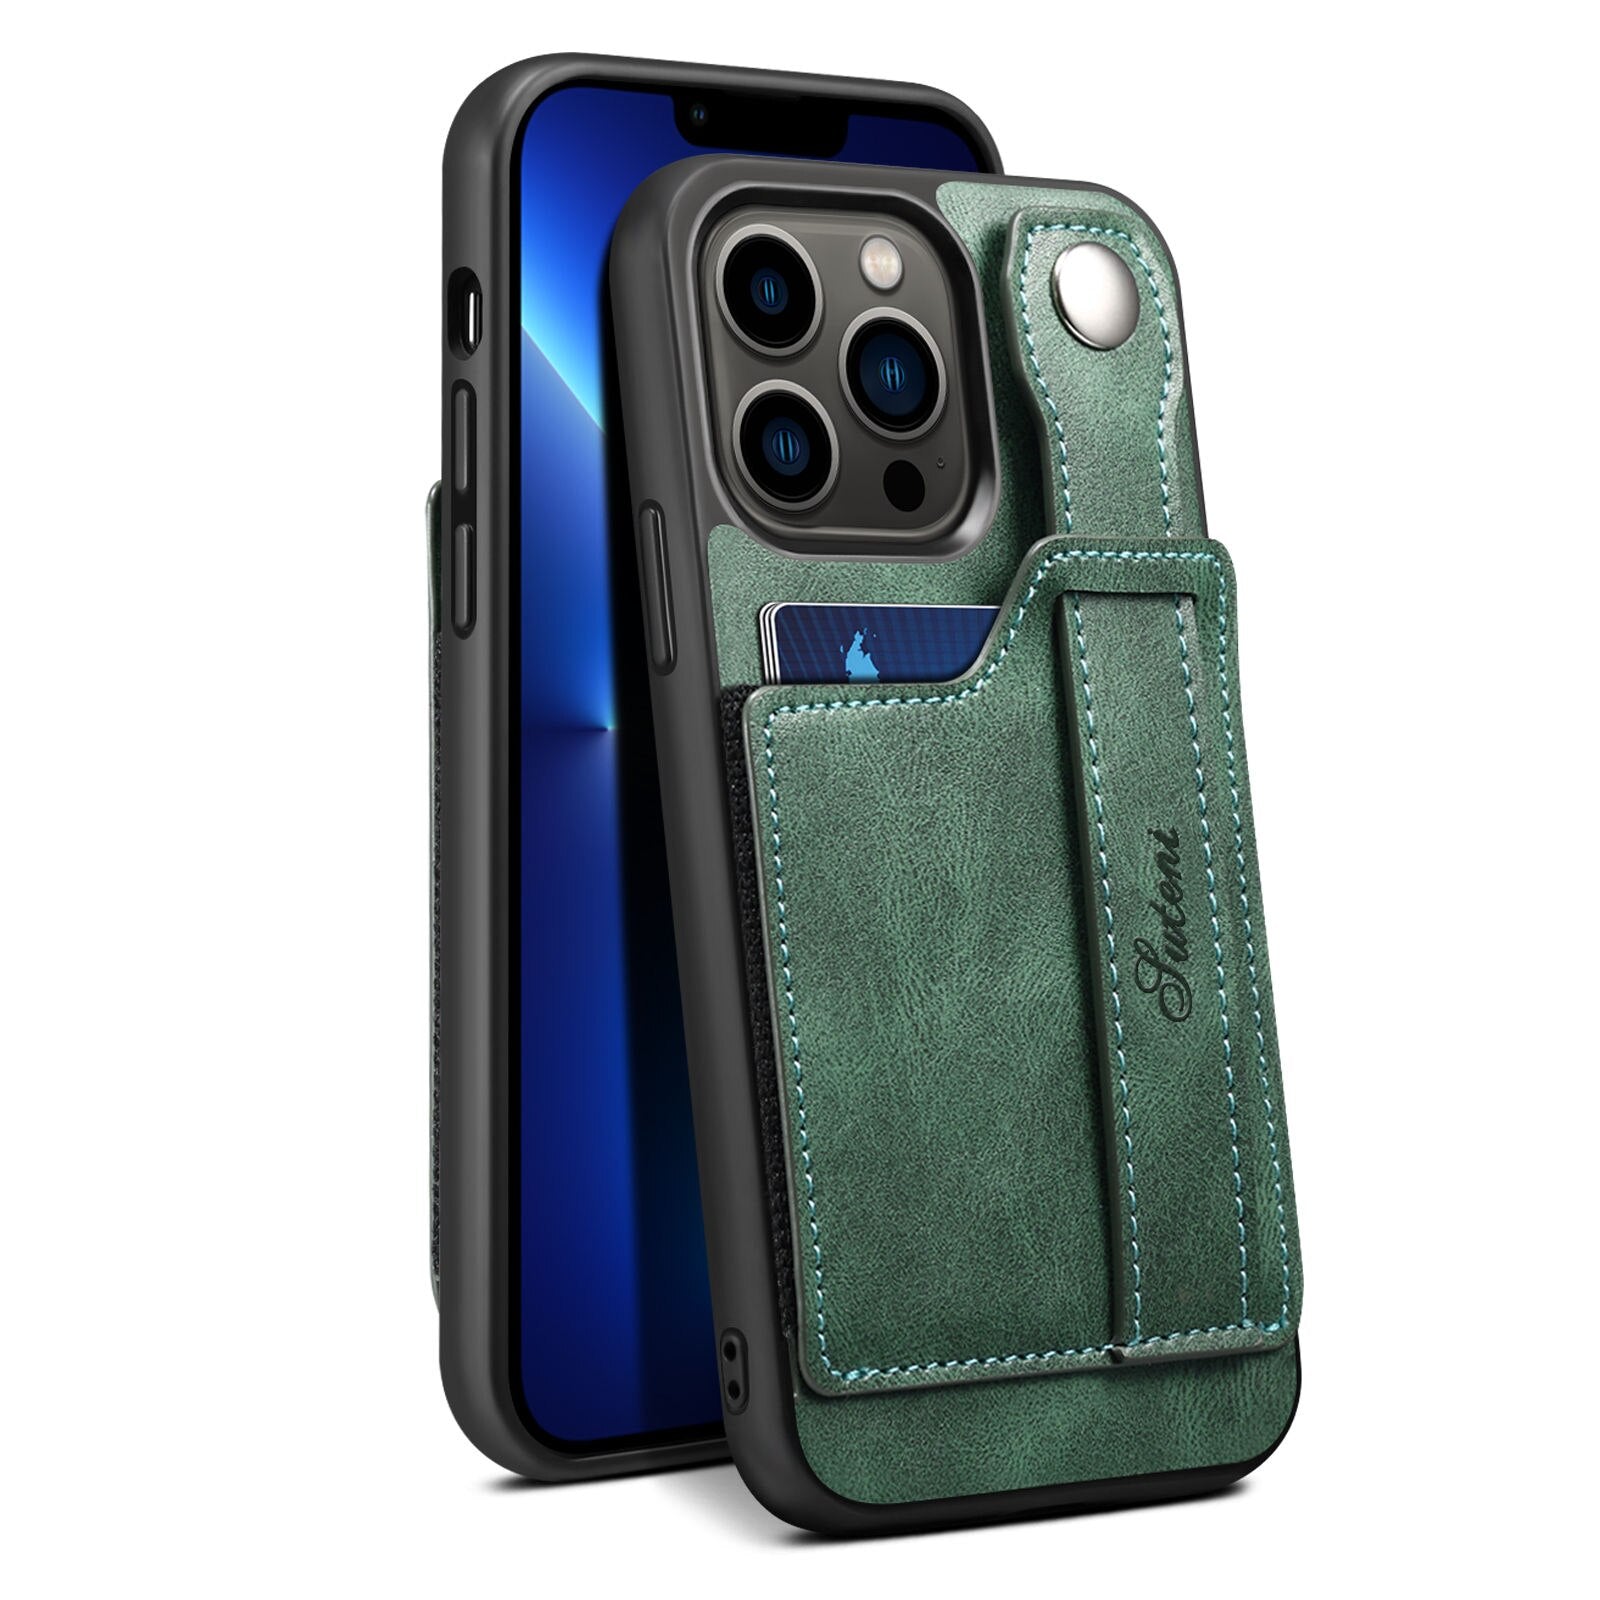 Case For iPhone 14 Pro Max Case PU Leather Wallet Flip Cover Stand Feature with Wrist Strap and Credit Cards Pocket for iPhone 14 Pro - 0 For iPhone 14 / Green / United States Find Epic Store